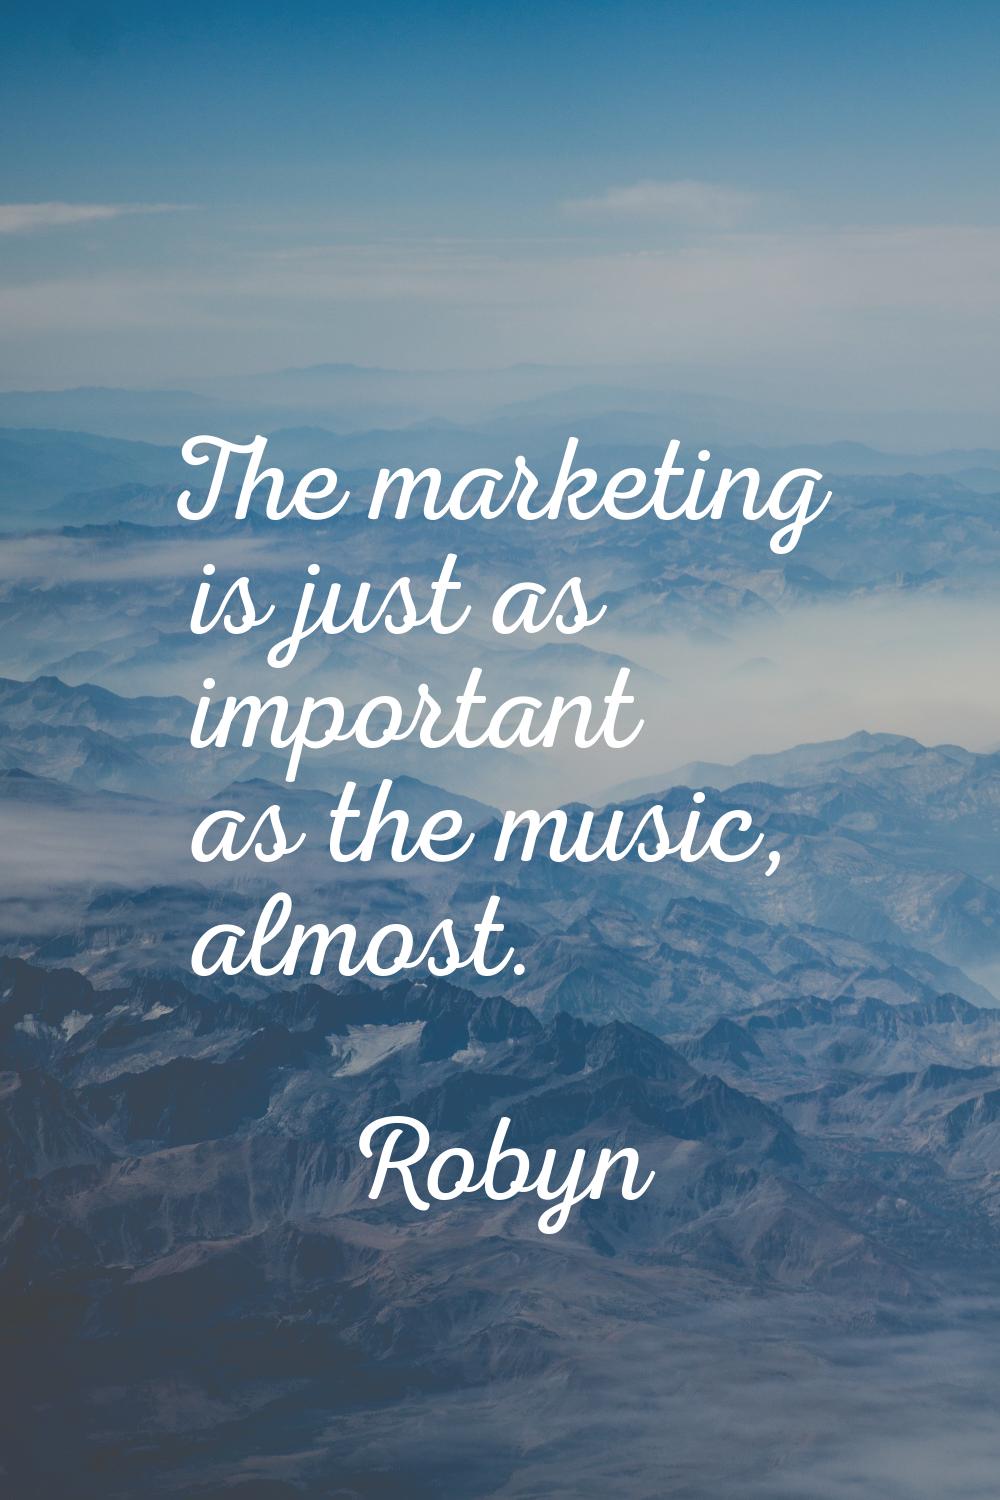 The marketing is just as important as the music, almost.